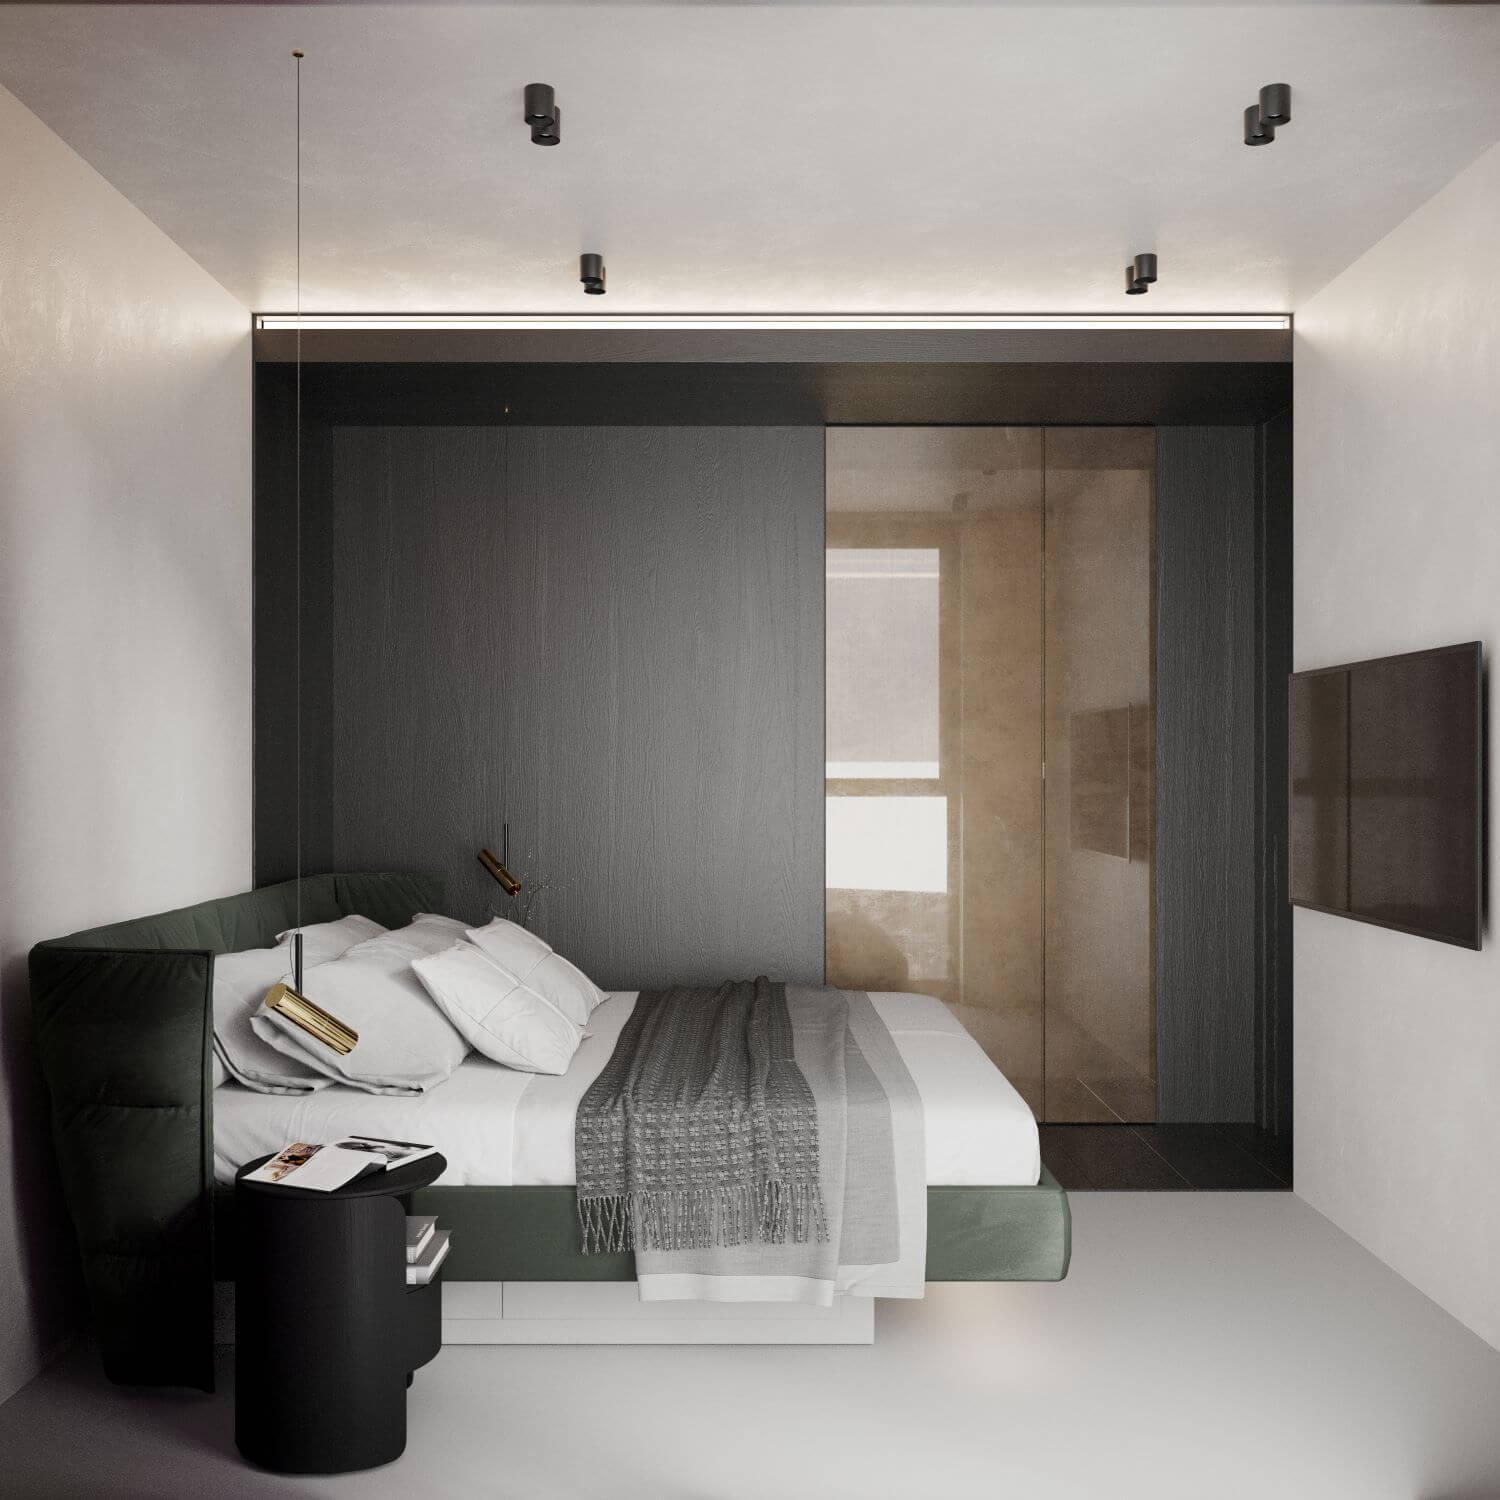 Carbon Apartment in Kyiv, Ukraine by Bet|Visualization